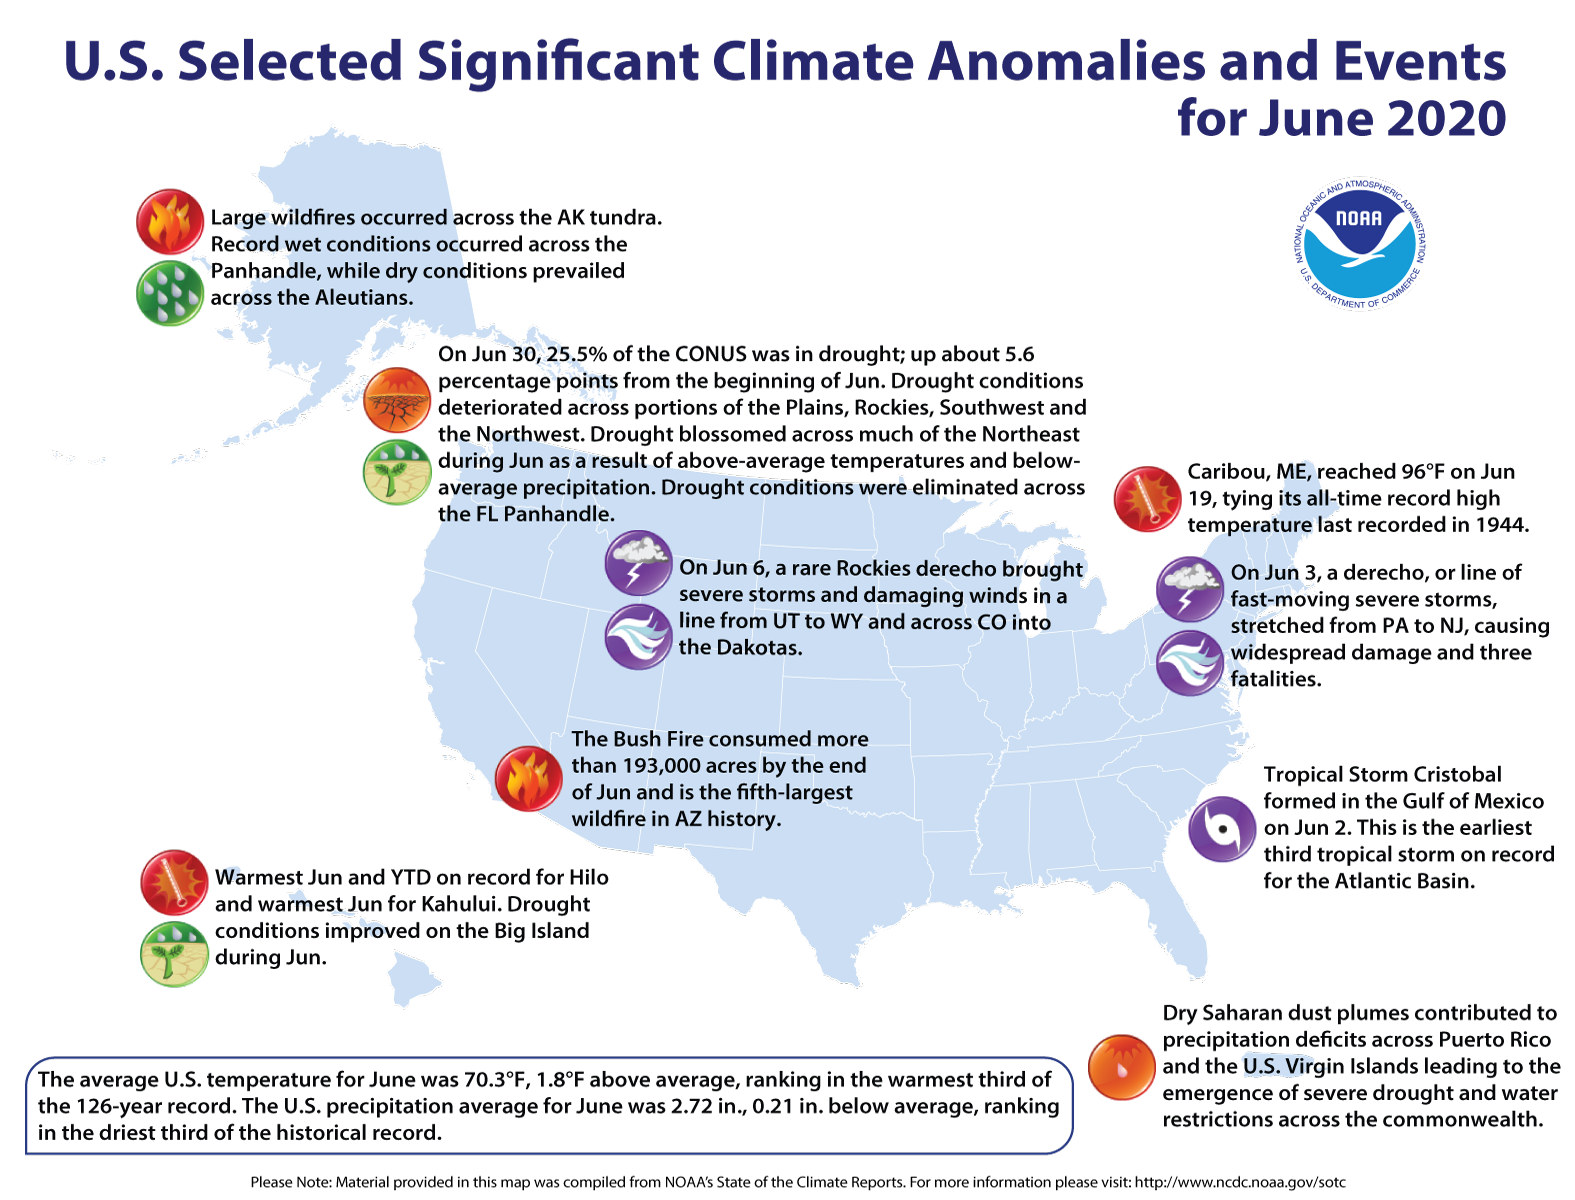 An annotated map of the United States showing notable climate and weather events that occurred across the country during June 2020. For details, please visit http://bit.ly/USClimate202006.